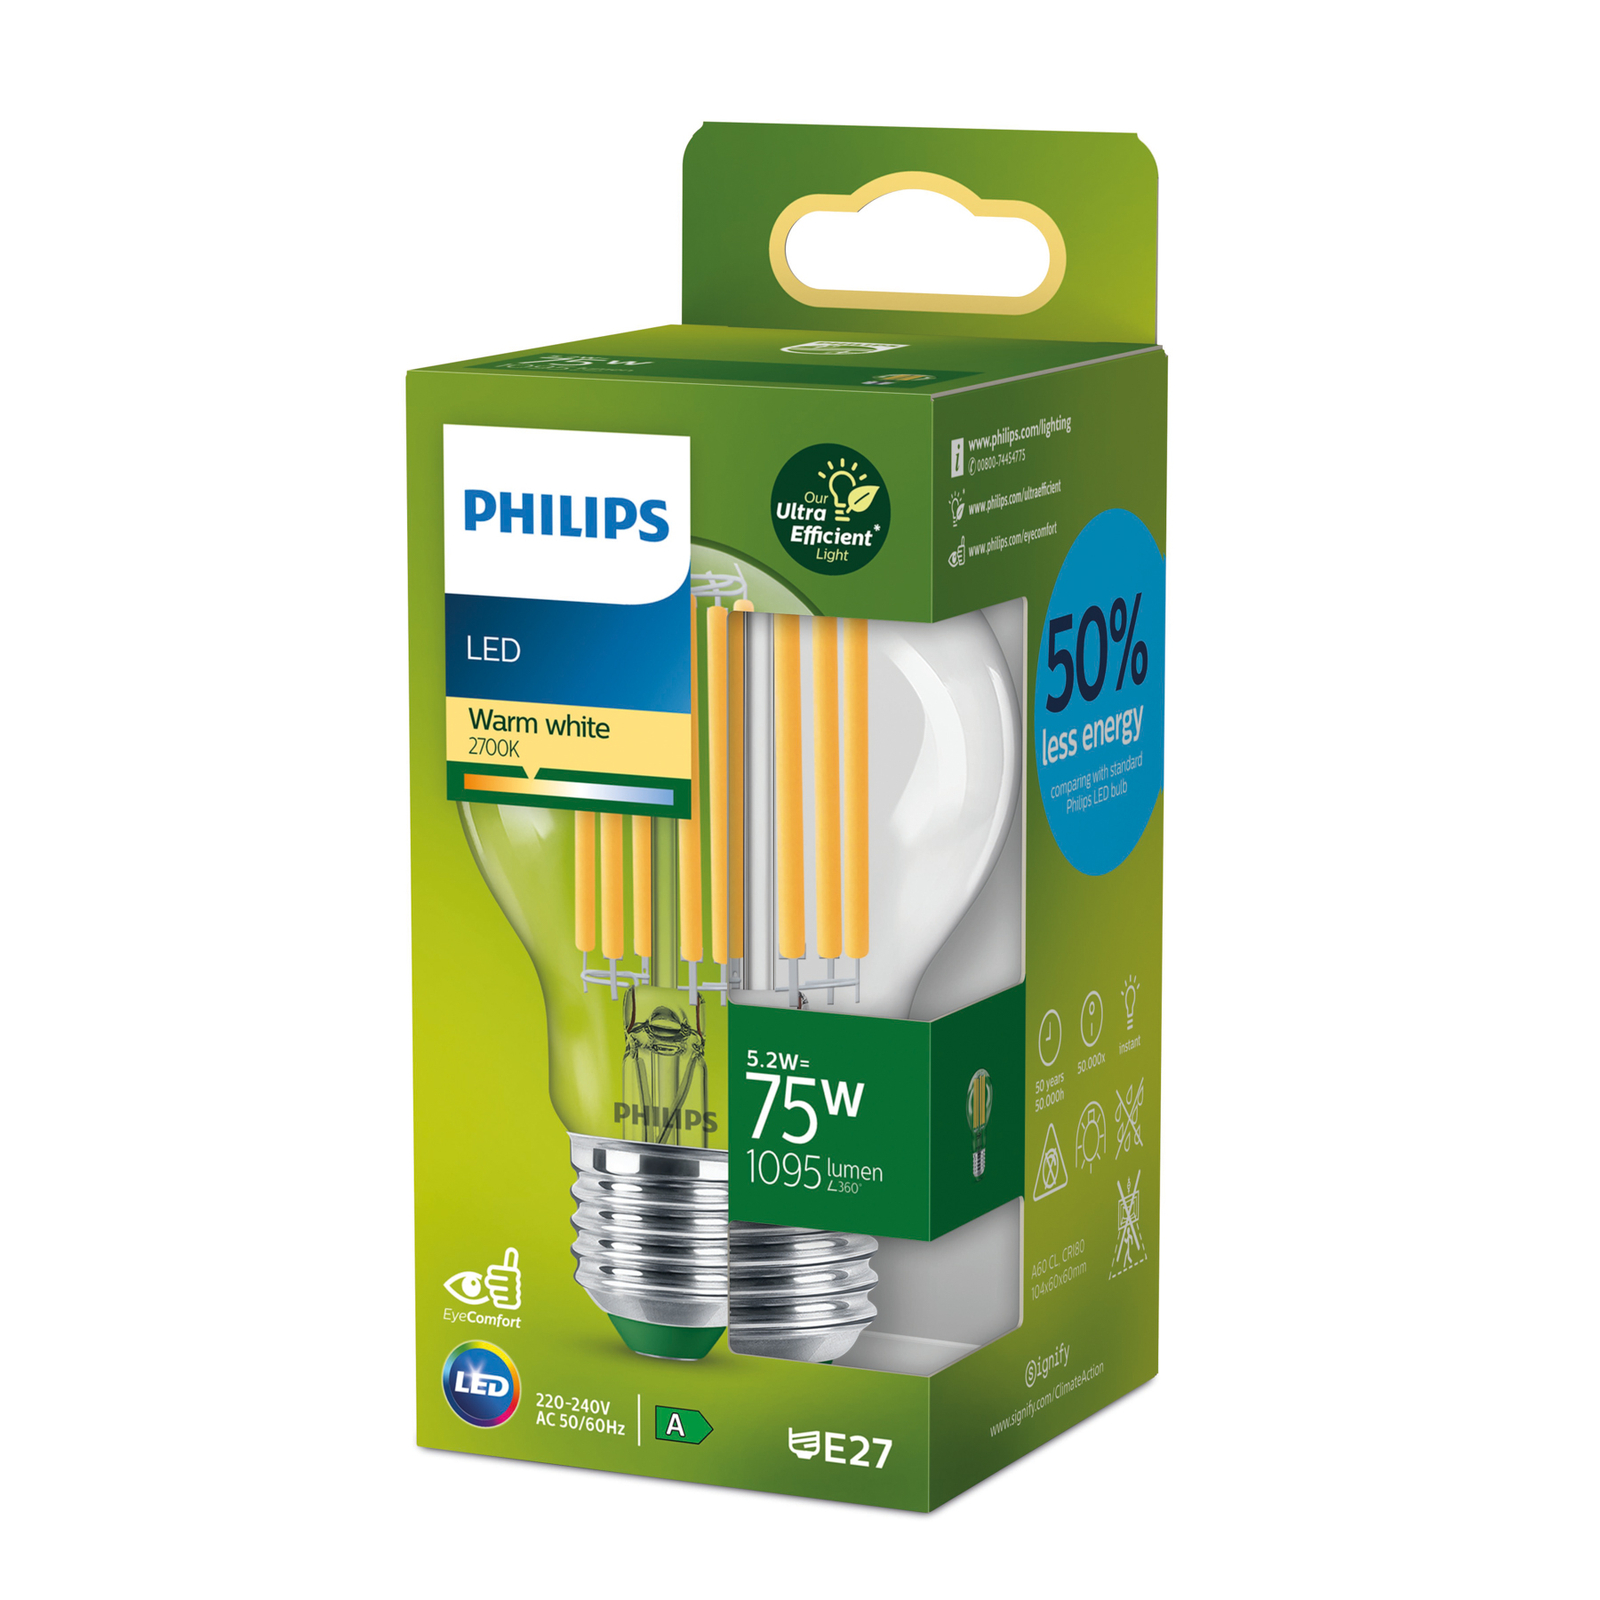 Philips E27 LED A60 5,2W 1095lm 2 700K claire